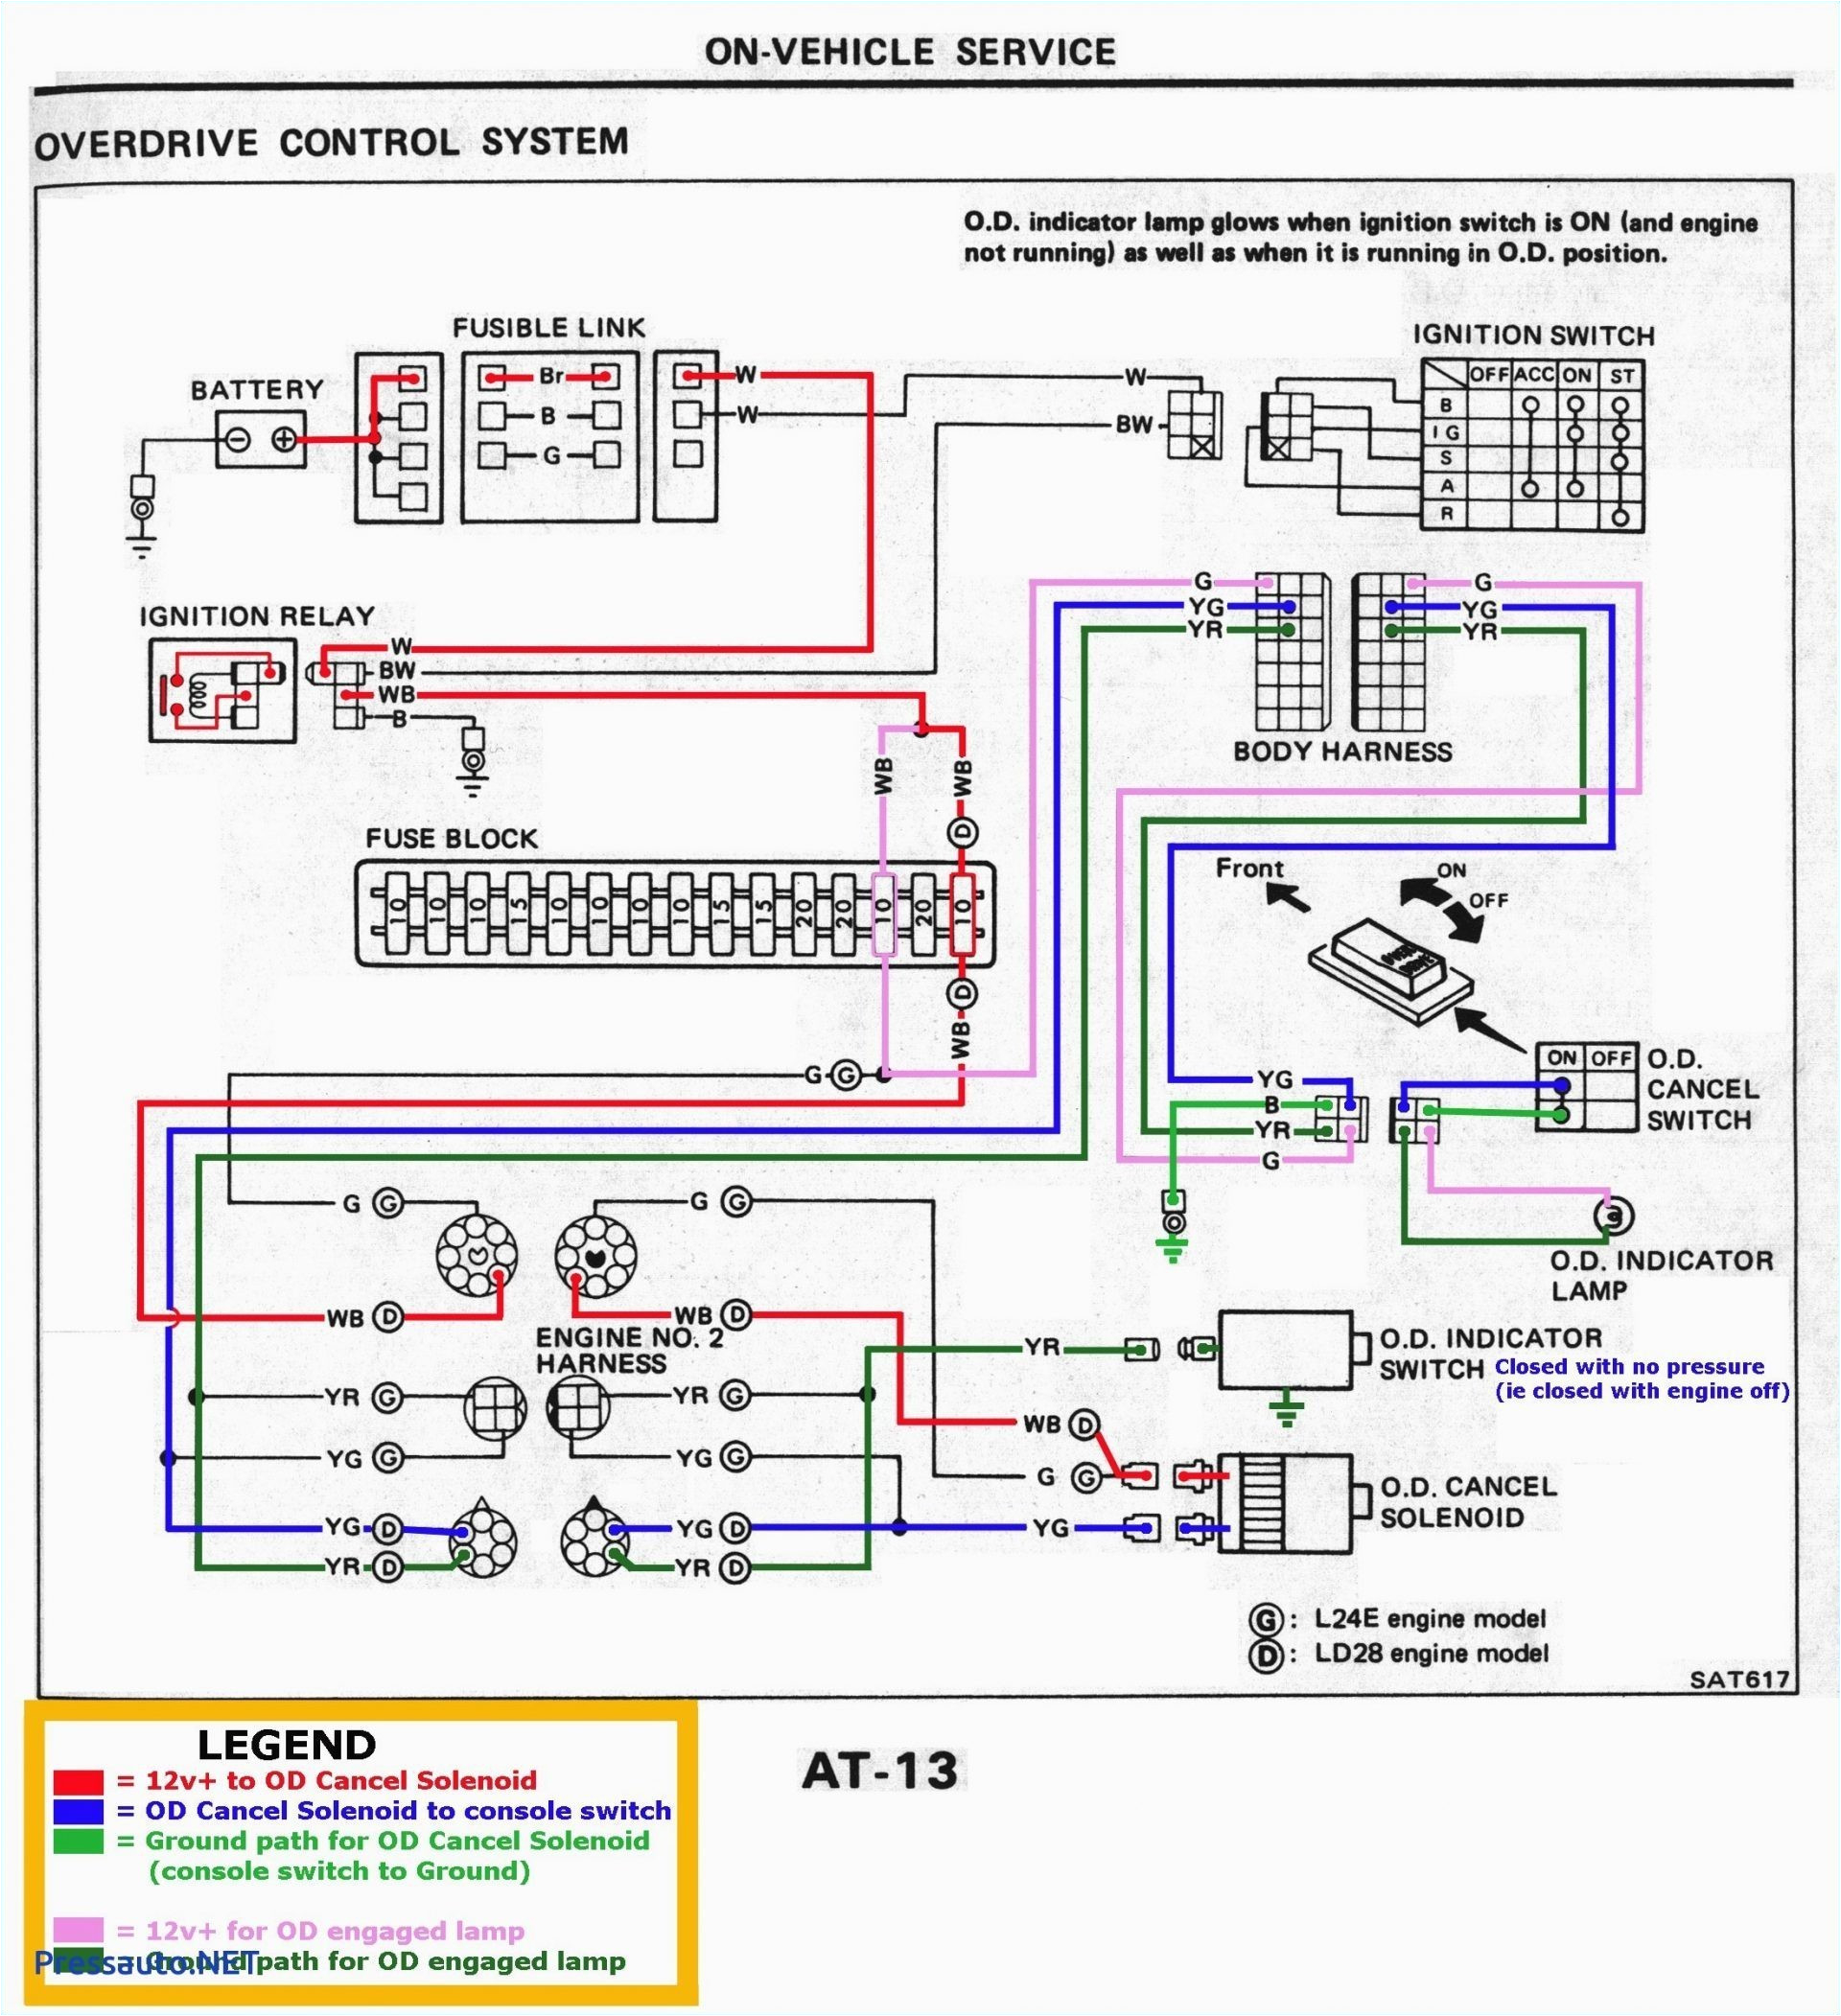 wiring diagram further ignition circuit diagram on wiring led data led bulbs 9 c wiring schematics